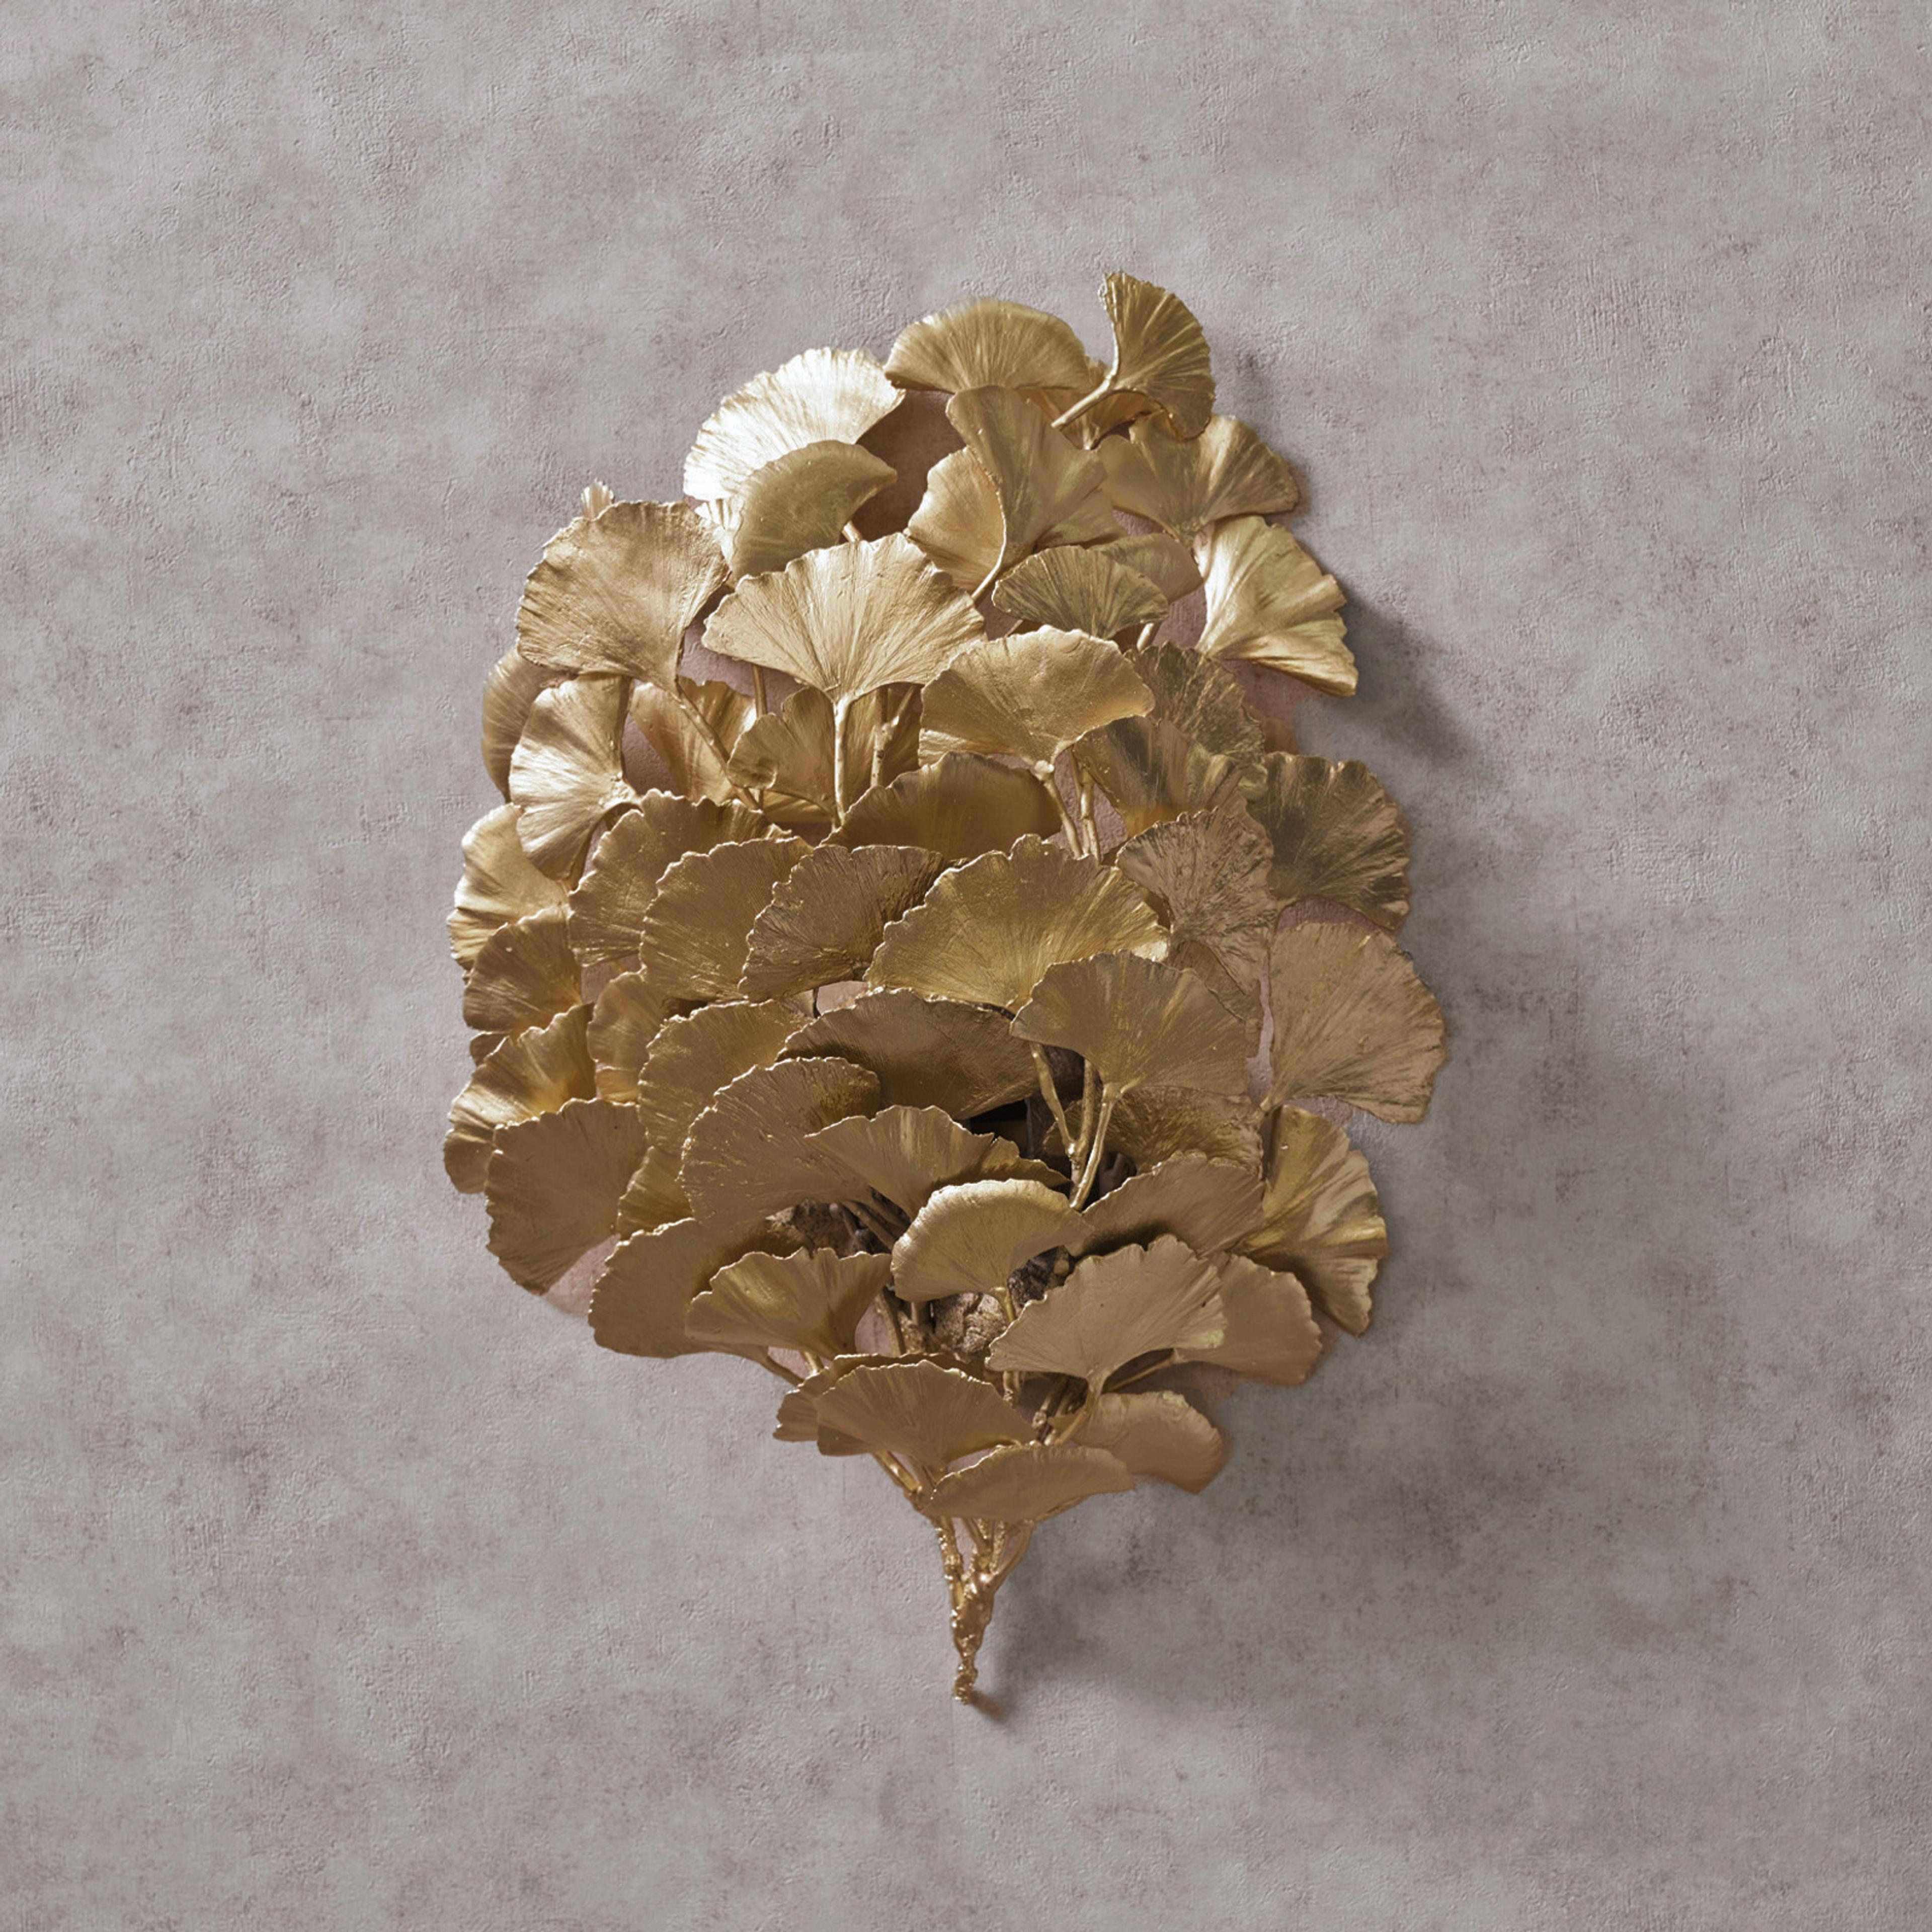 Ginkgo Sconce by Veronica Mar